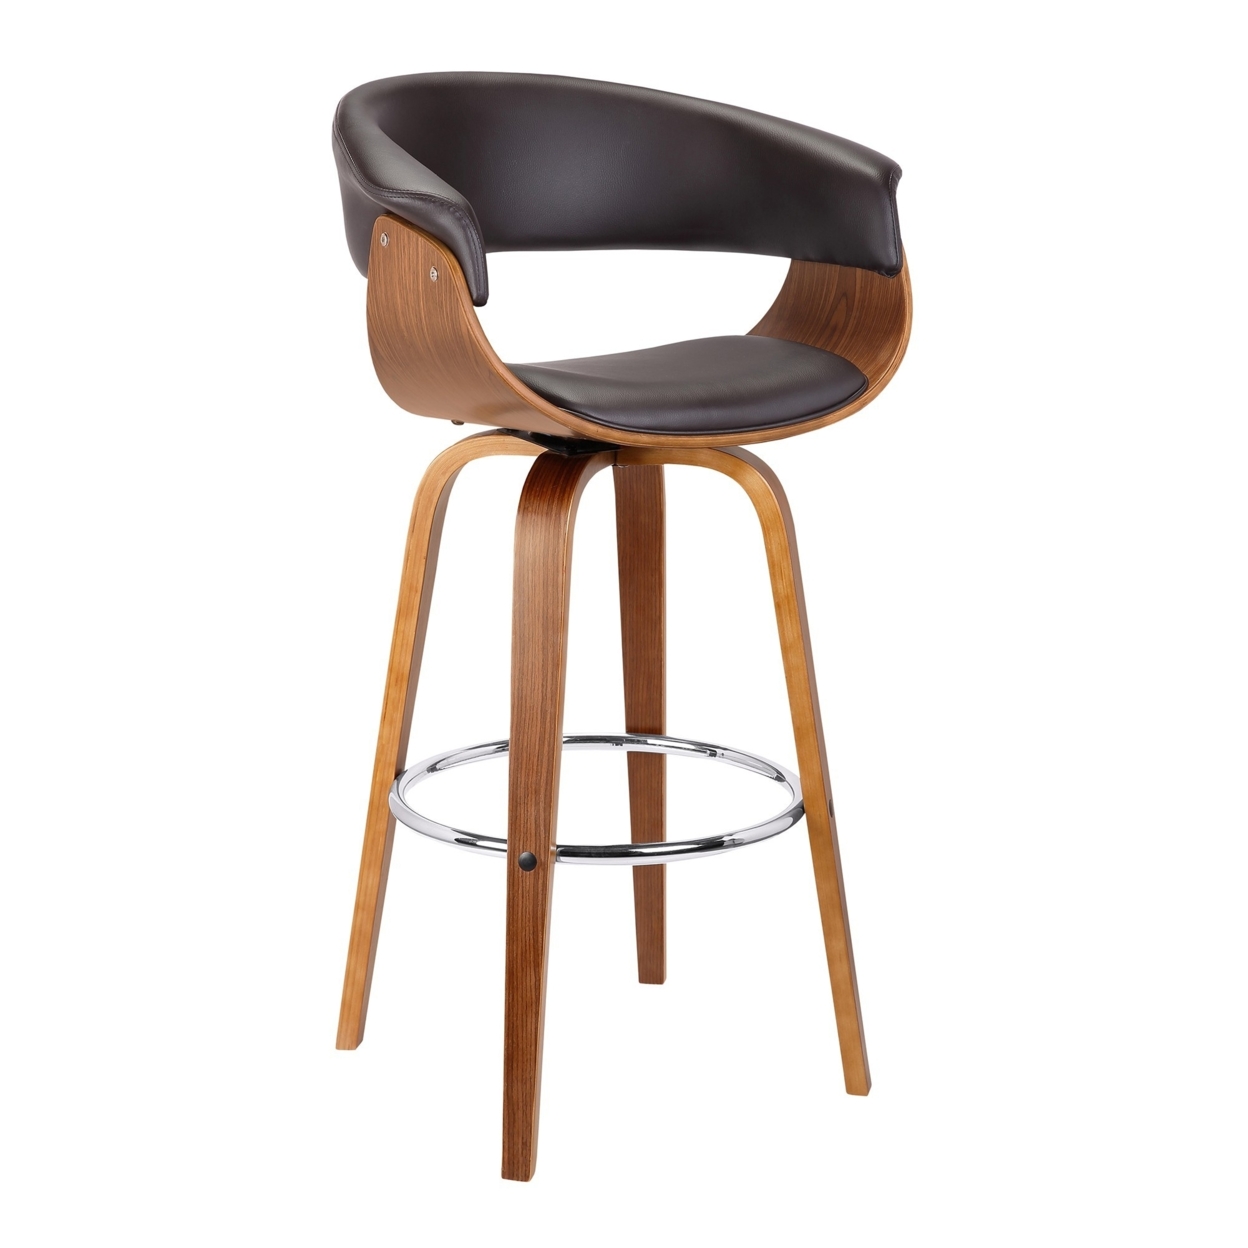 26 Inches Leatherette Swivel Barstool With Curved Design Seat, Brown- Saltoro Sherpi